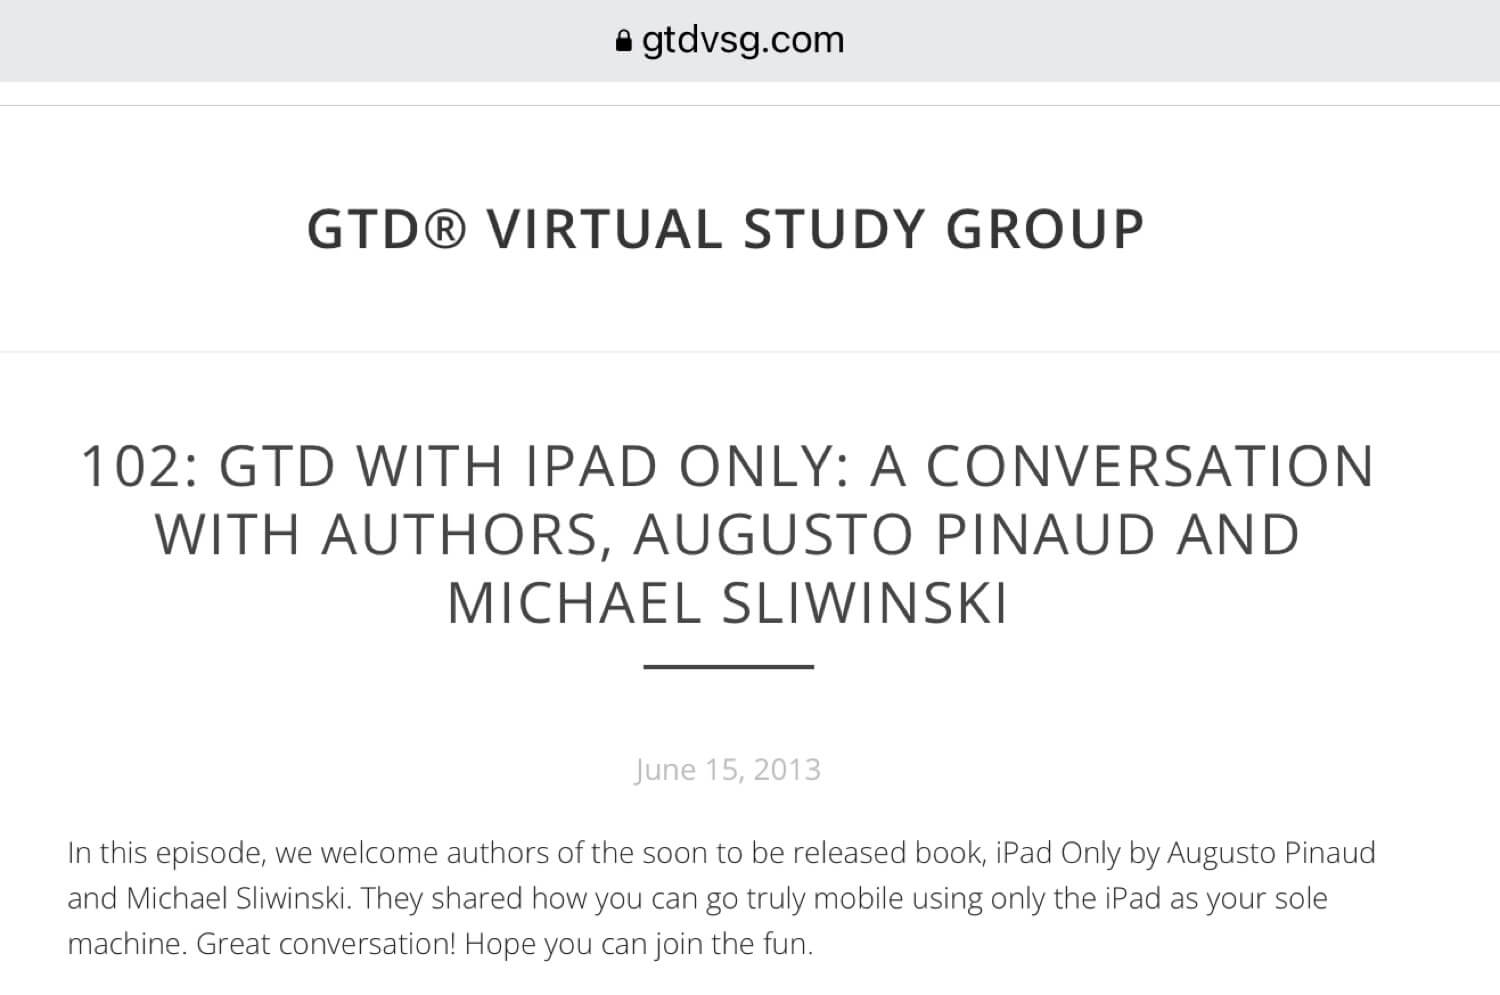 On GTD Virtual Study Group talking about #iPadOnly